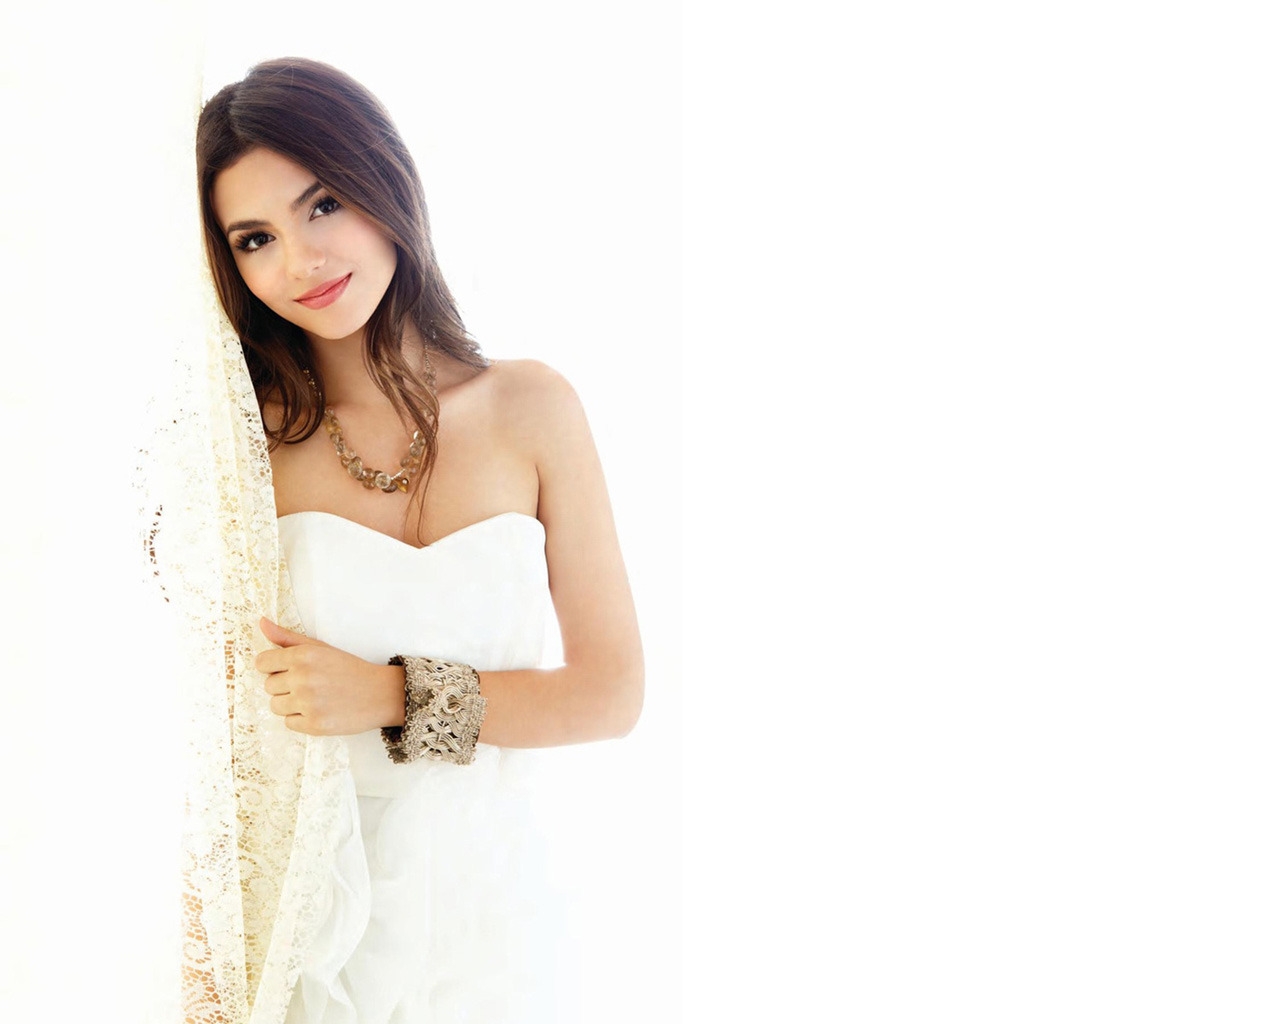 Victoria Justice White Outfit for 1280 x 1024 resolution